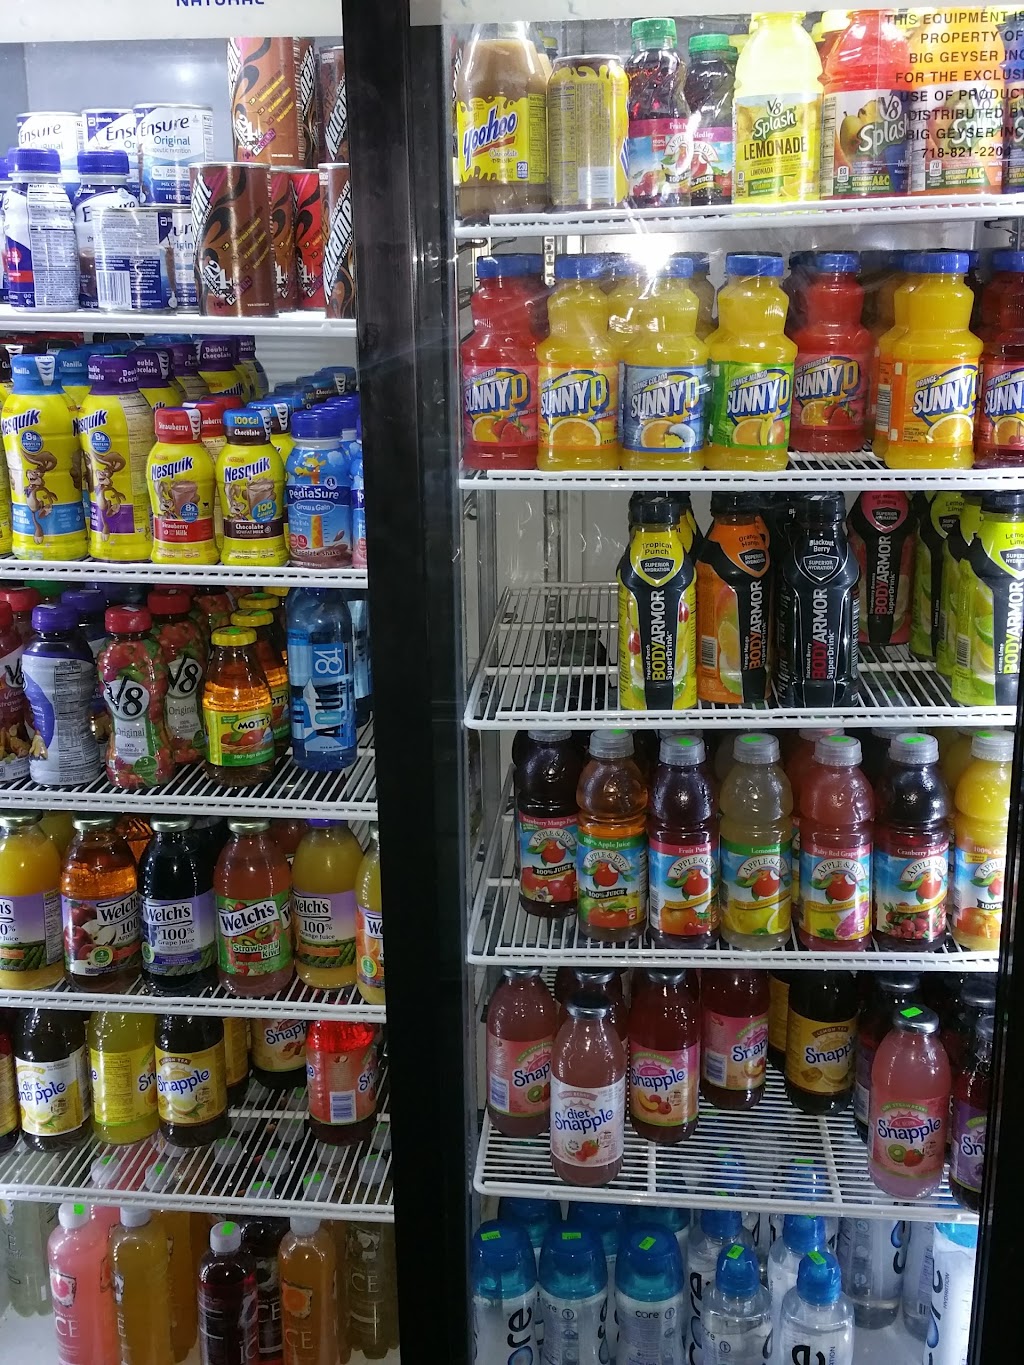 125 west 165th st grocery corp. | Photo 3 of 10 | Address: 125 W 165th St, Bronx, NY 10452, USA | Phone: (718) 538-0039